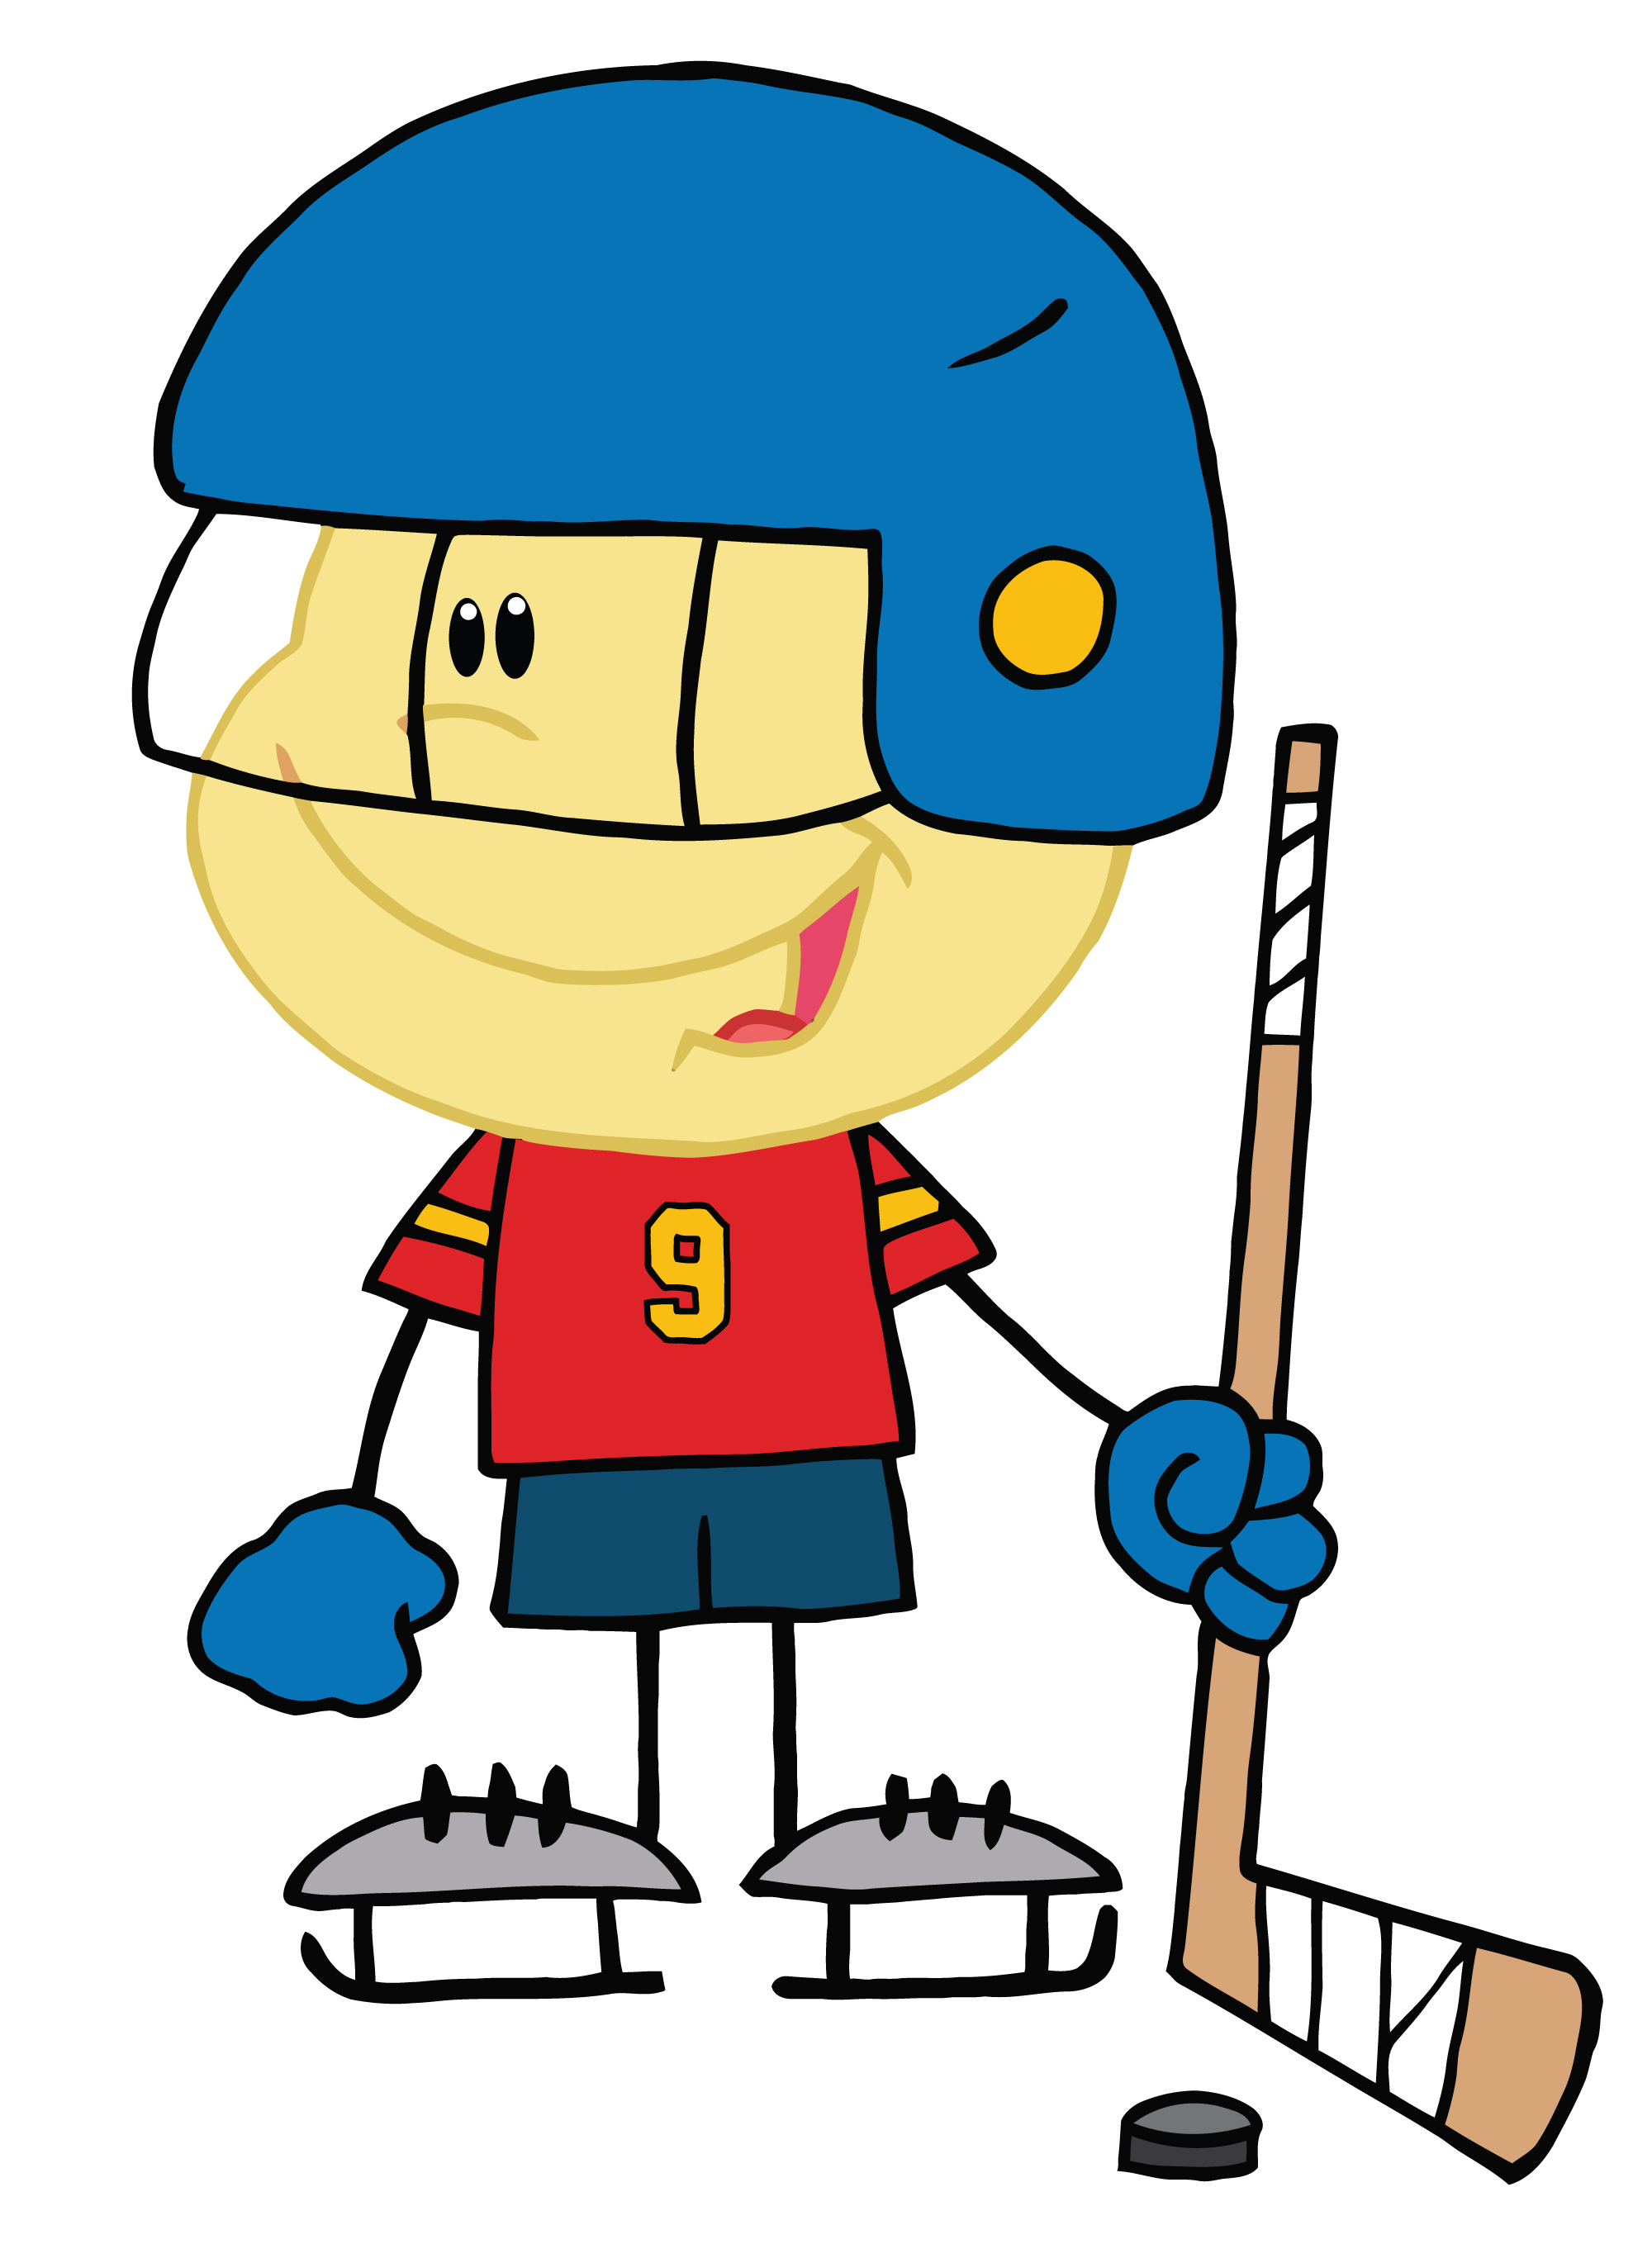 Hockey Stick Clipart Black And White - Free ...